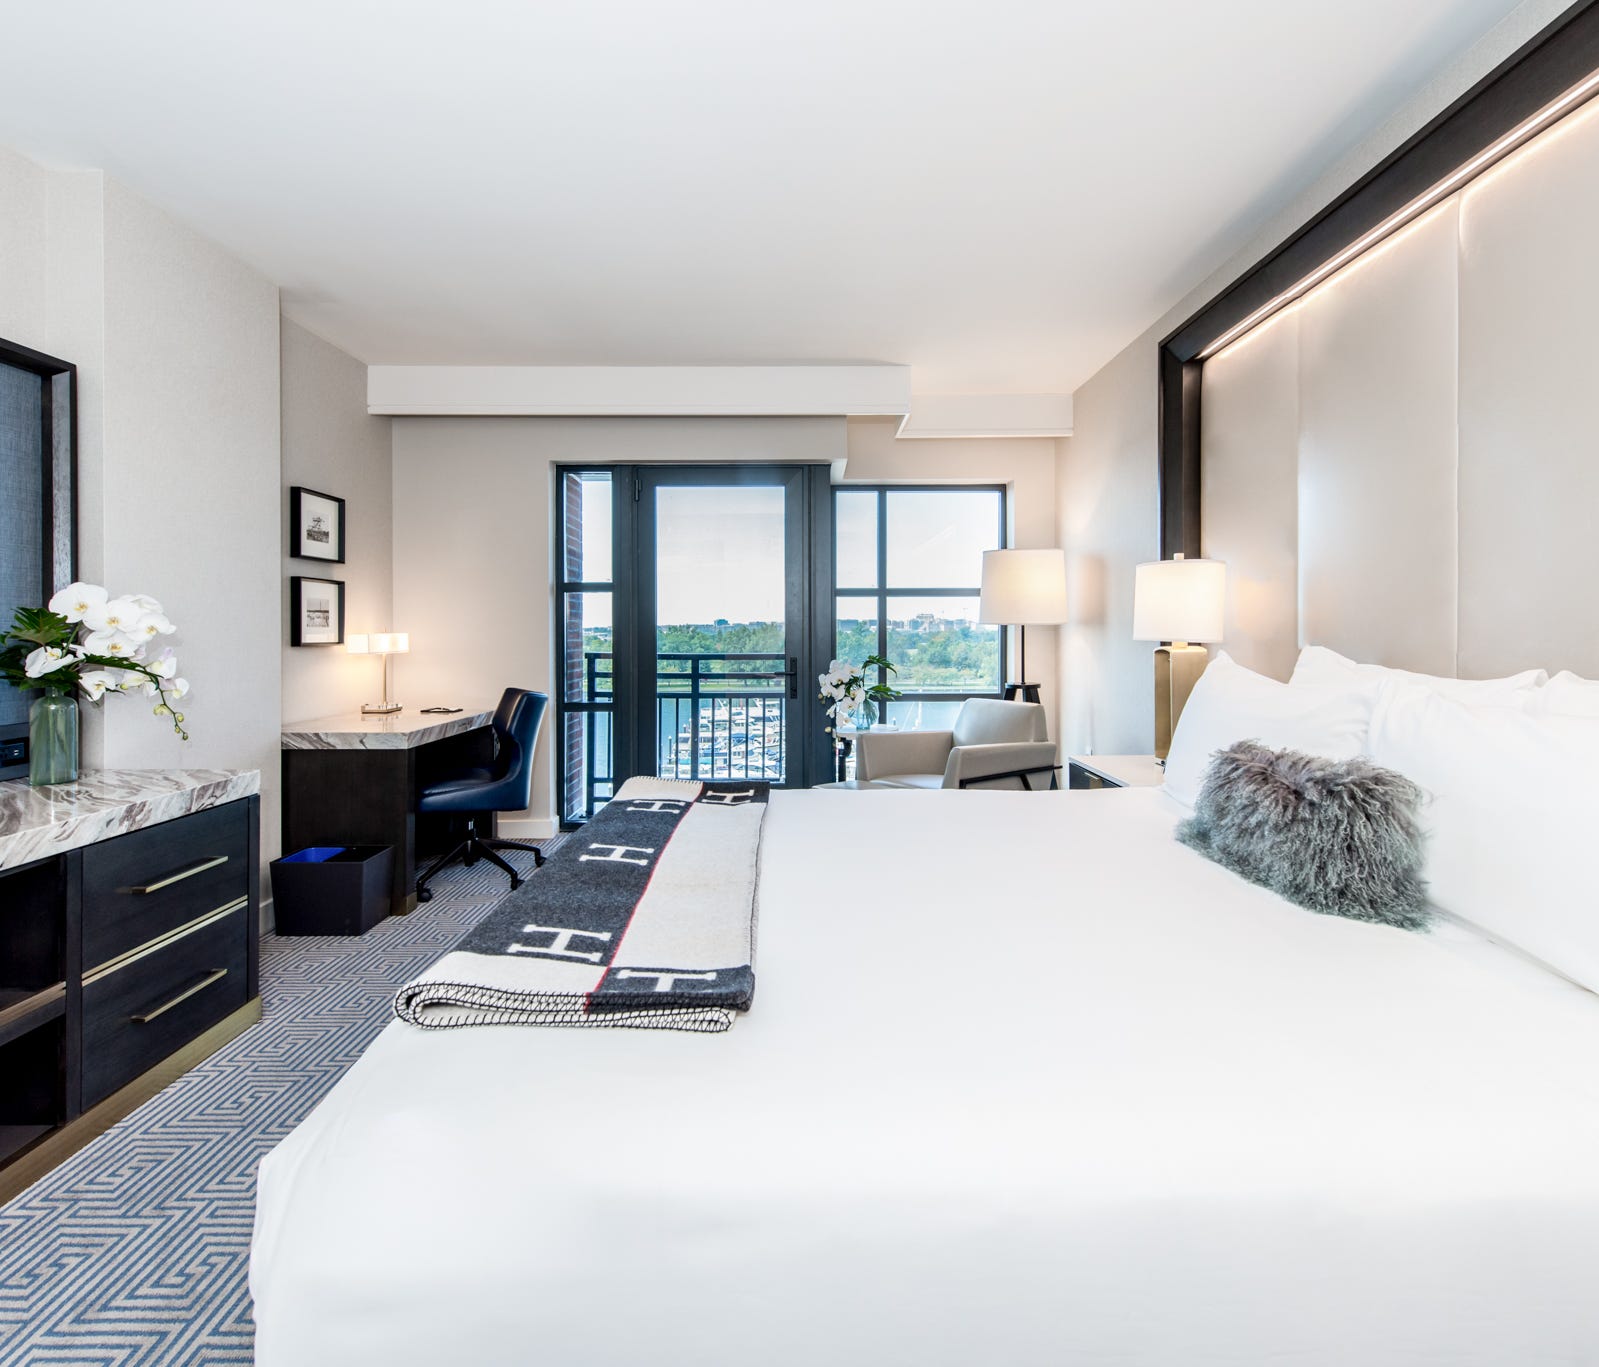 The InterContinental Washington D.C. - The Wharf  has 278 guestrooms, including 33 suites.